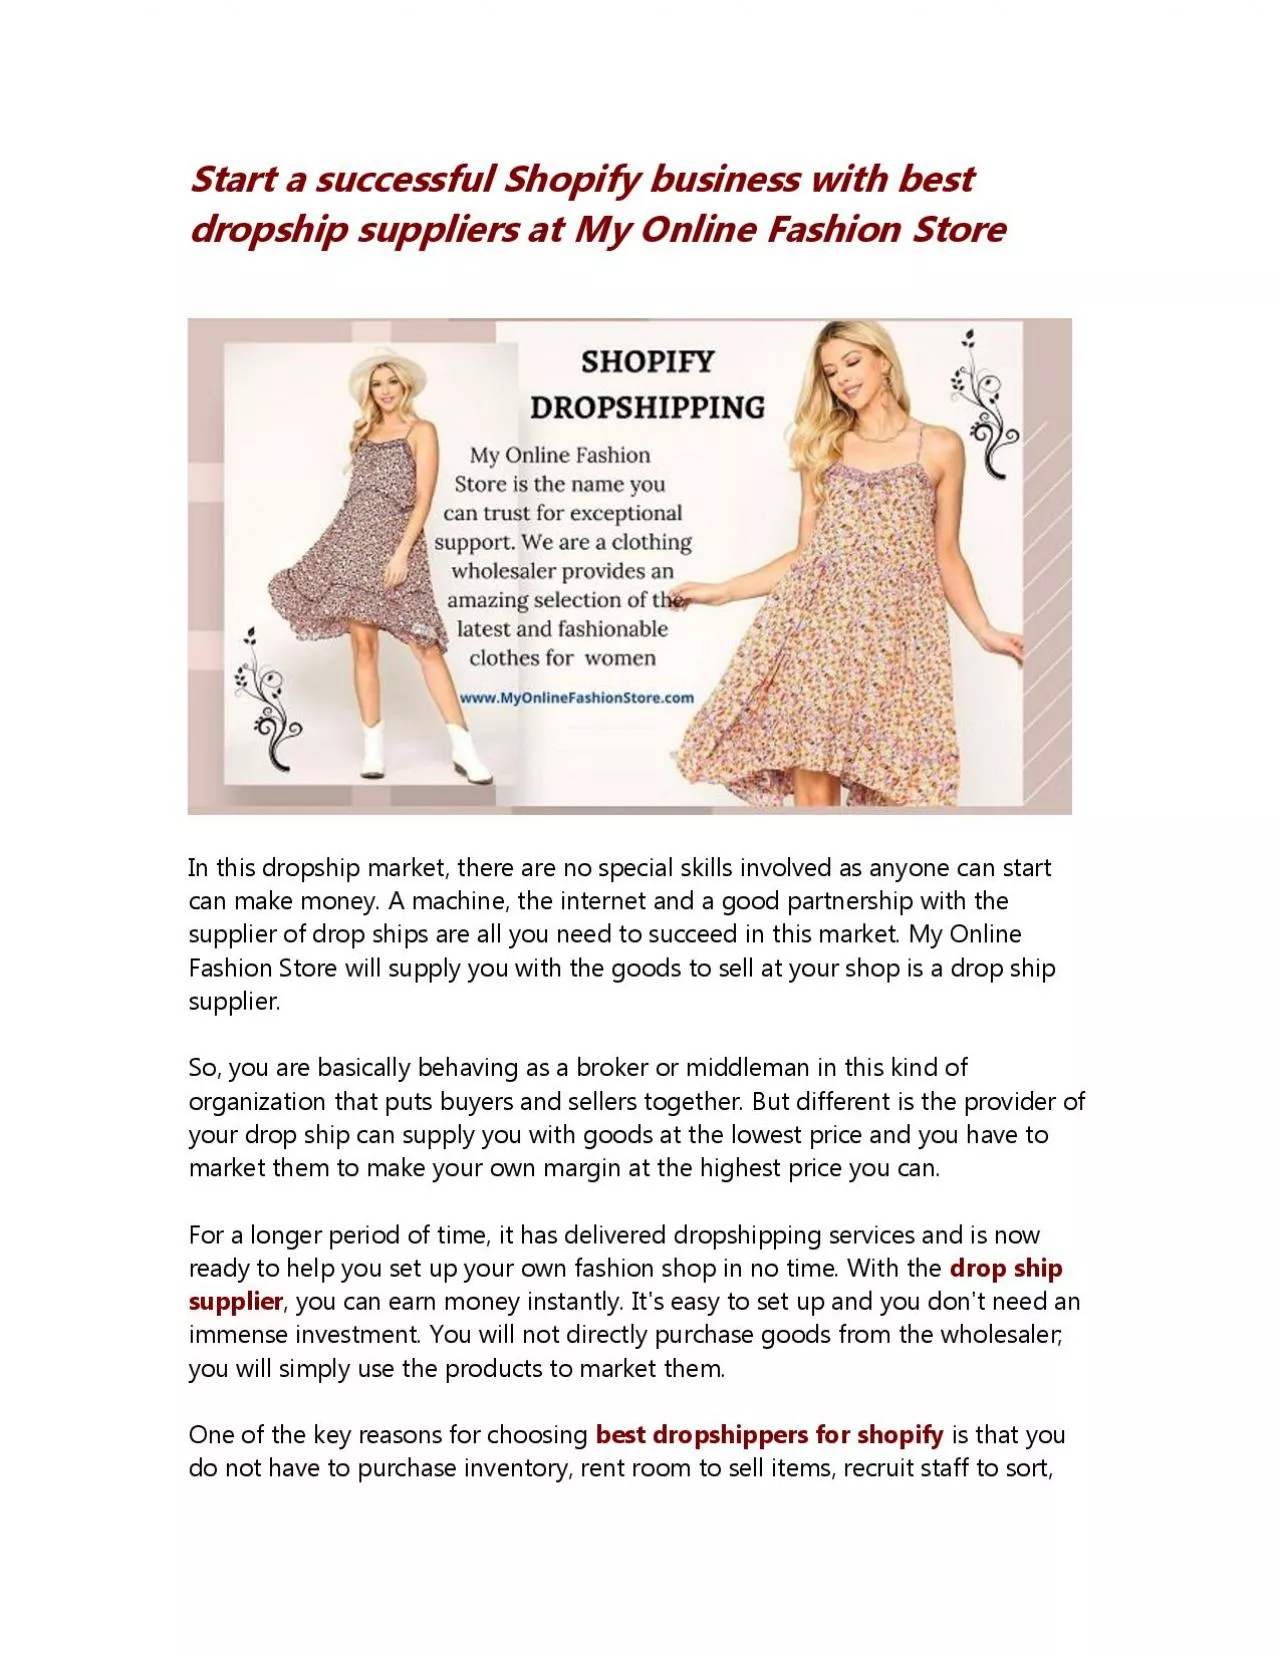 Start a successful Shopify business with best dropship suppliers at My Online Fashion